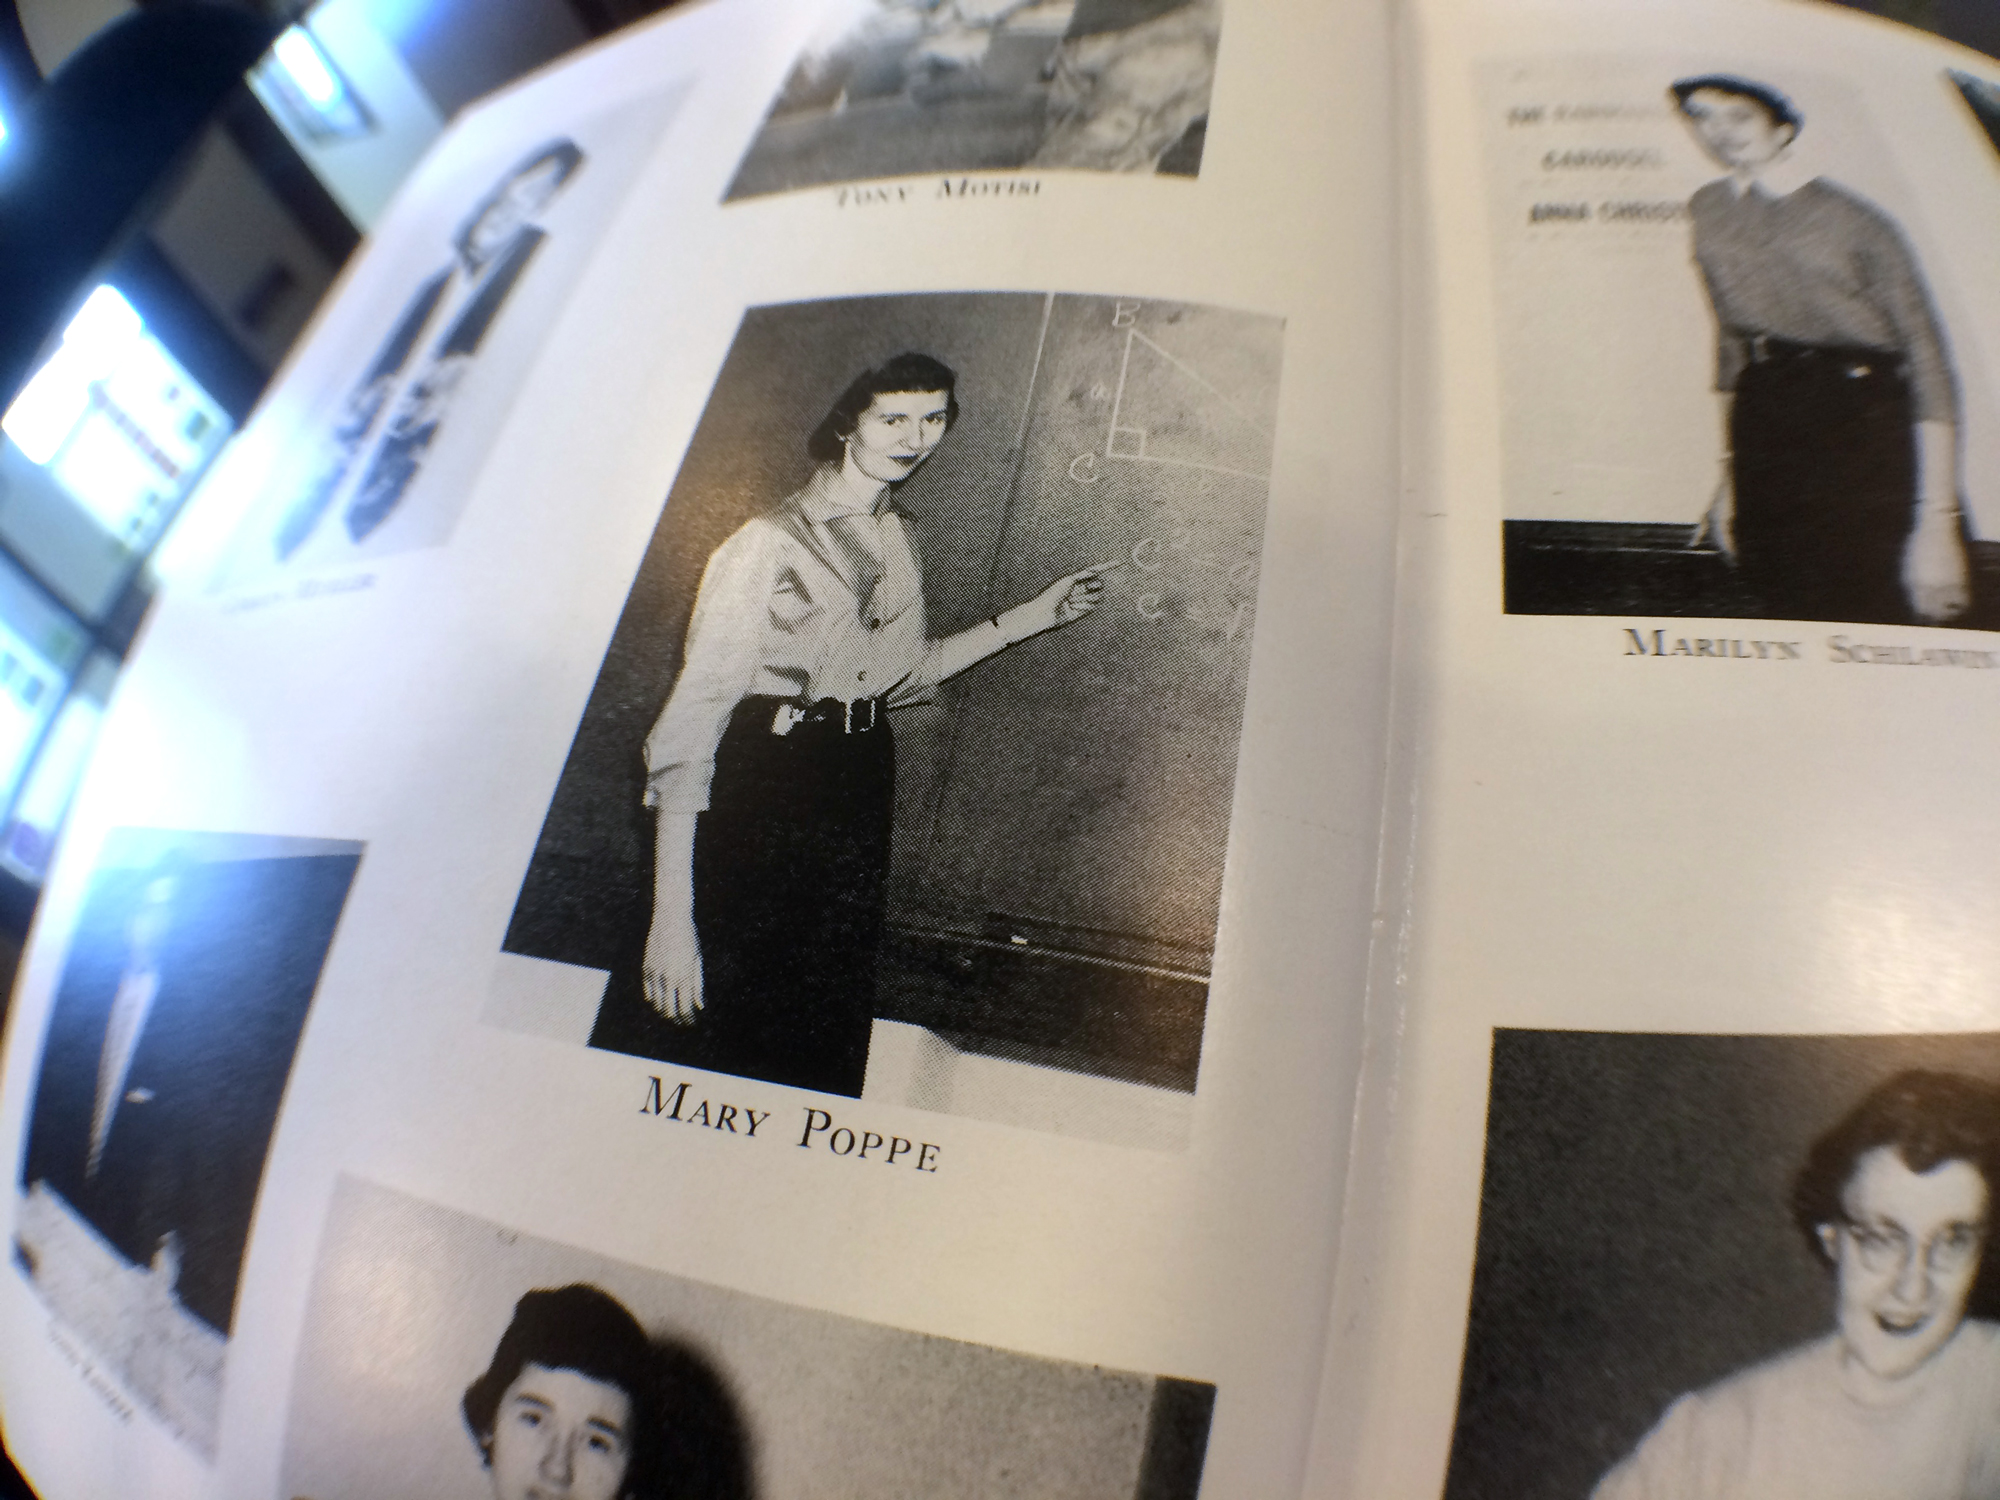 Mary Poppe Chrisman in the 1957 Minneiska yearbook.